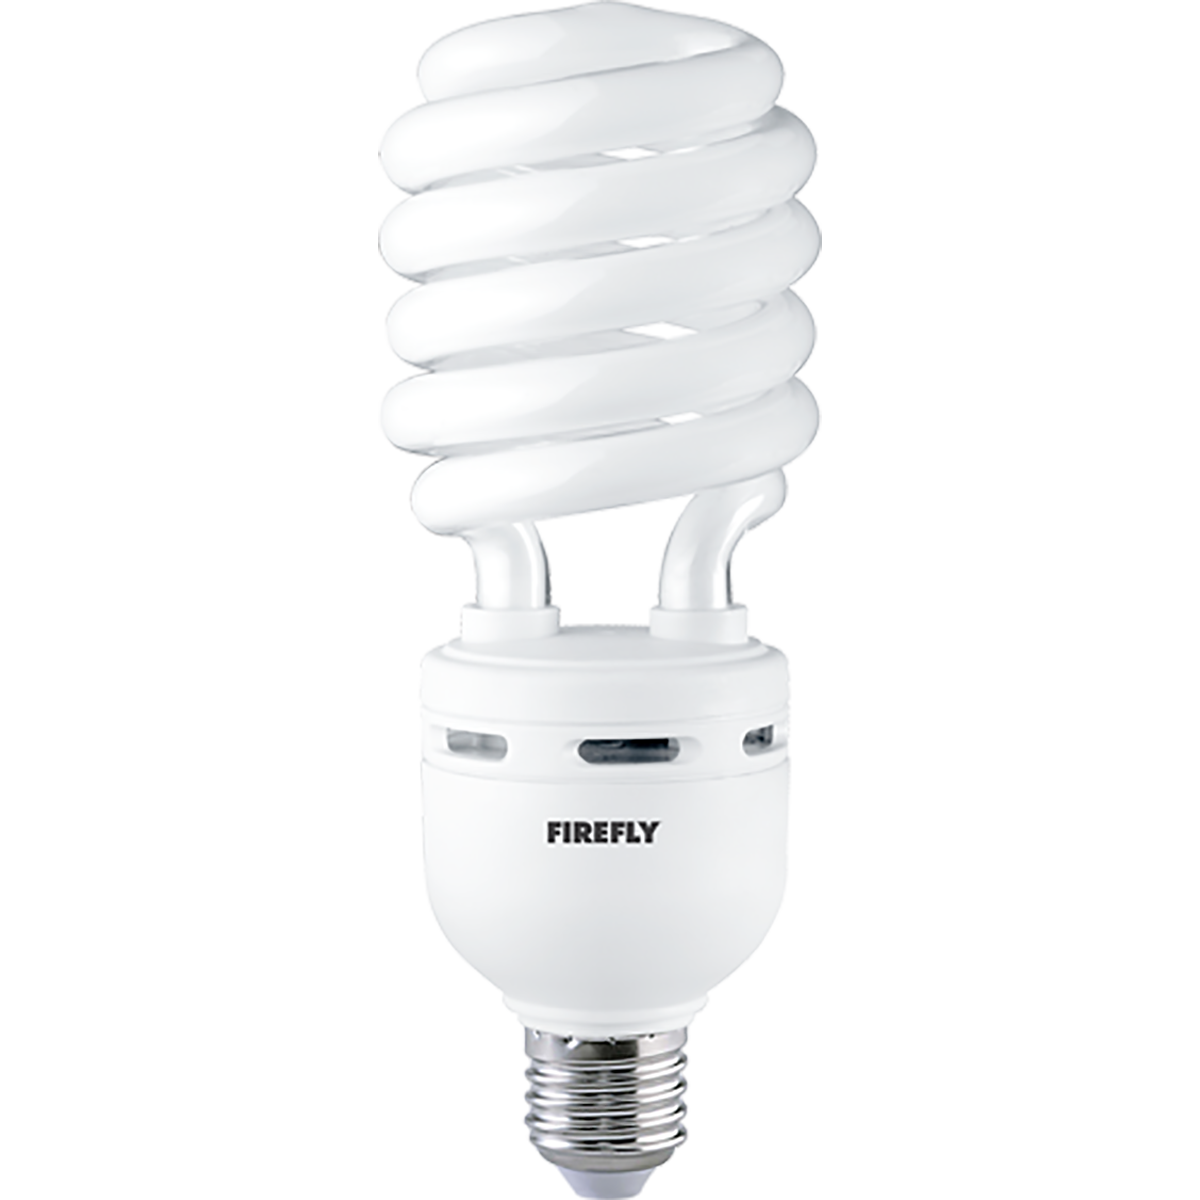 Firefly Compact Spiral Fluorescent Lamp 35W